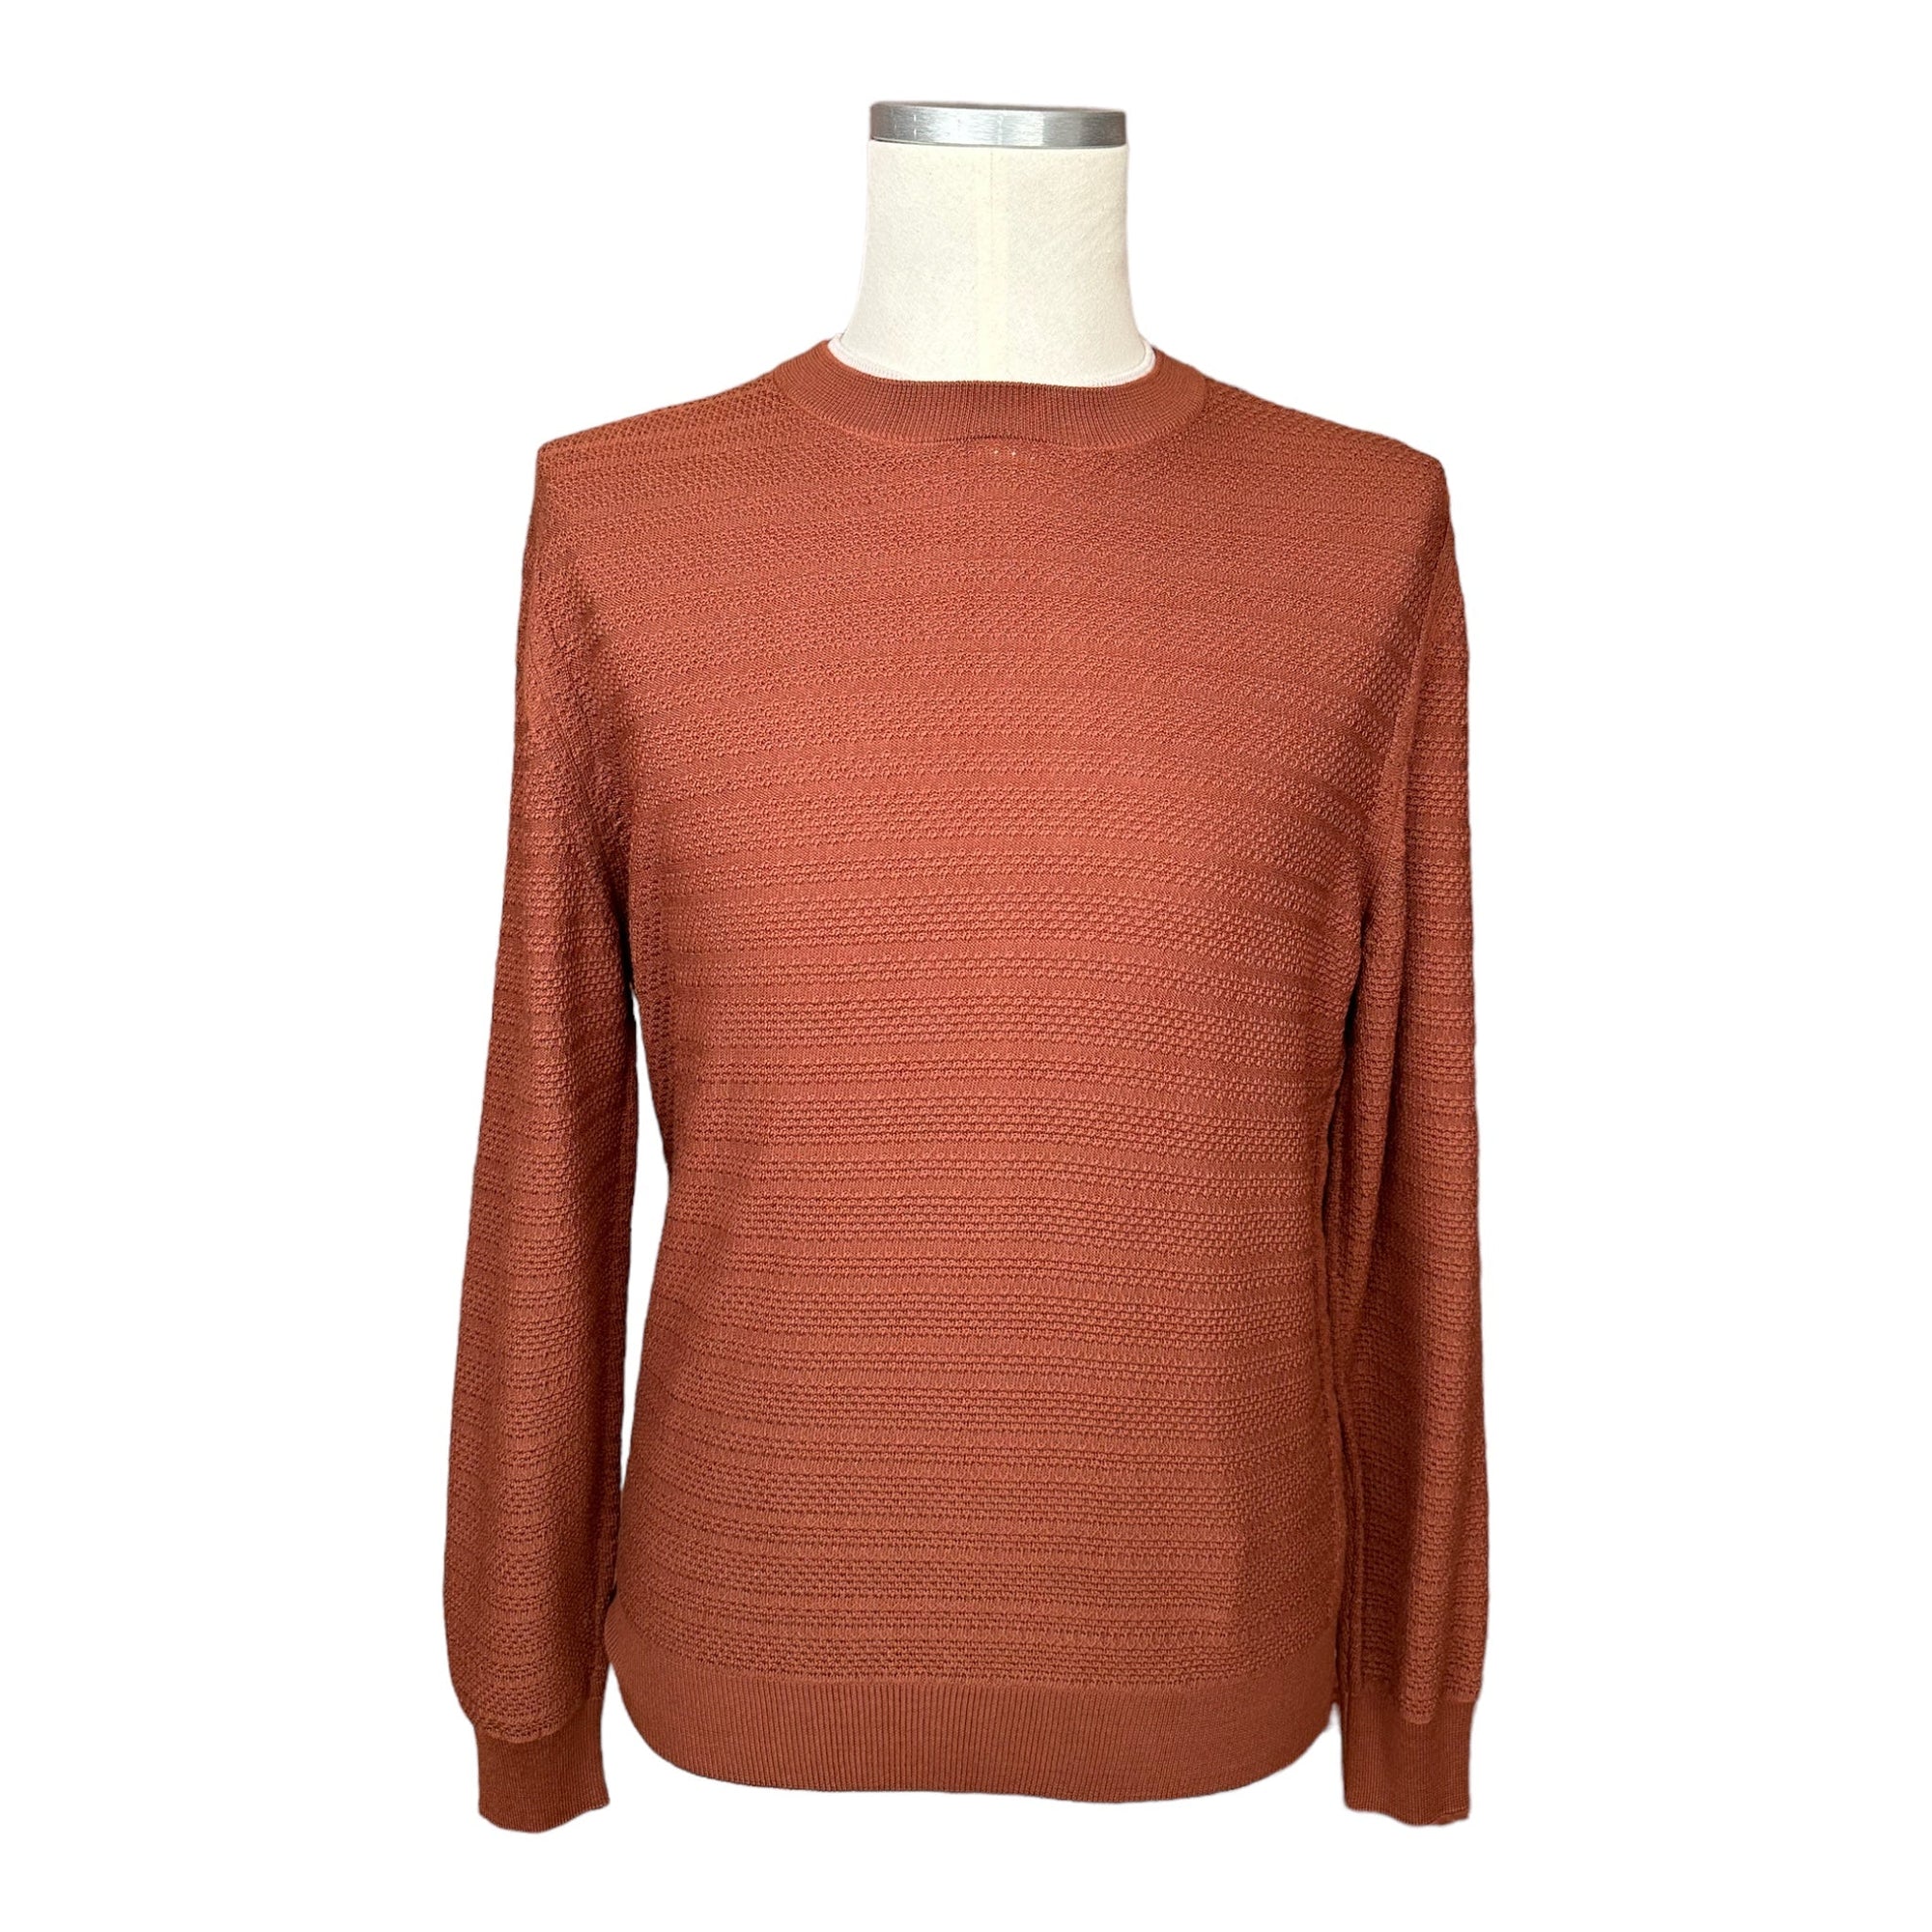 Zegna High Performance Knit Pullover - 24/7 Clothing